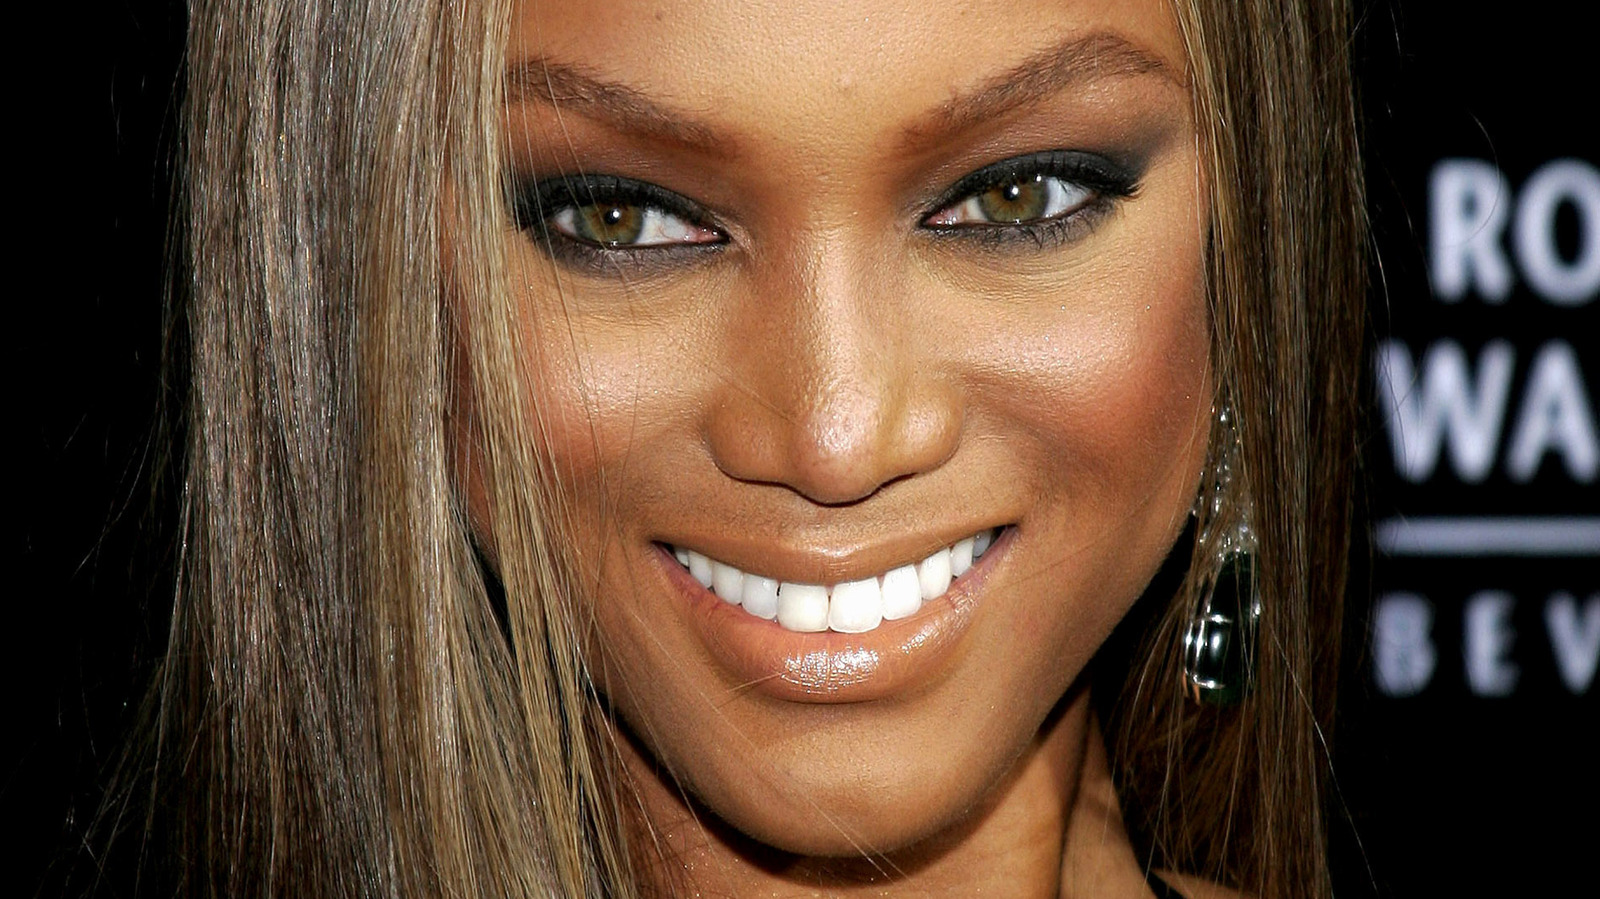 Tyra Banks opens up about her life and new business venture